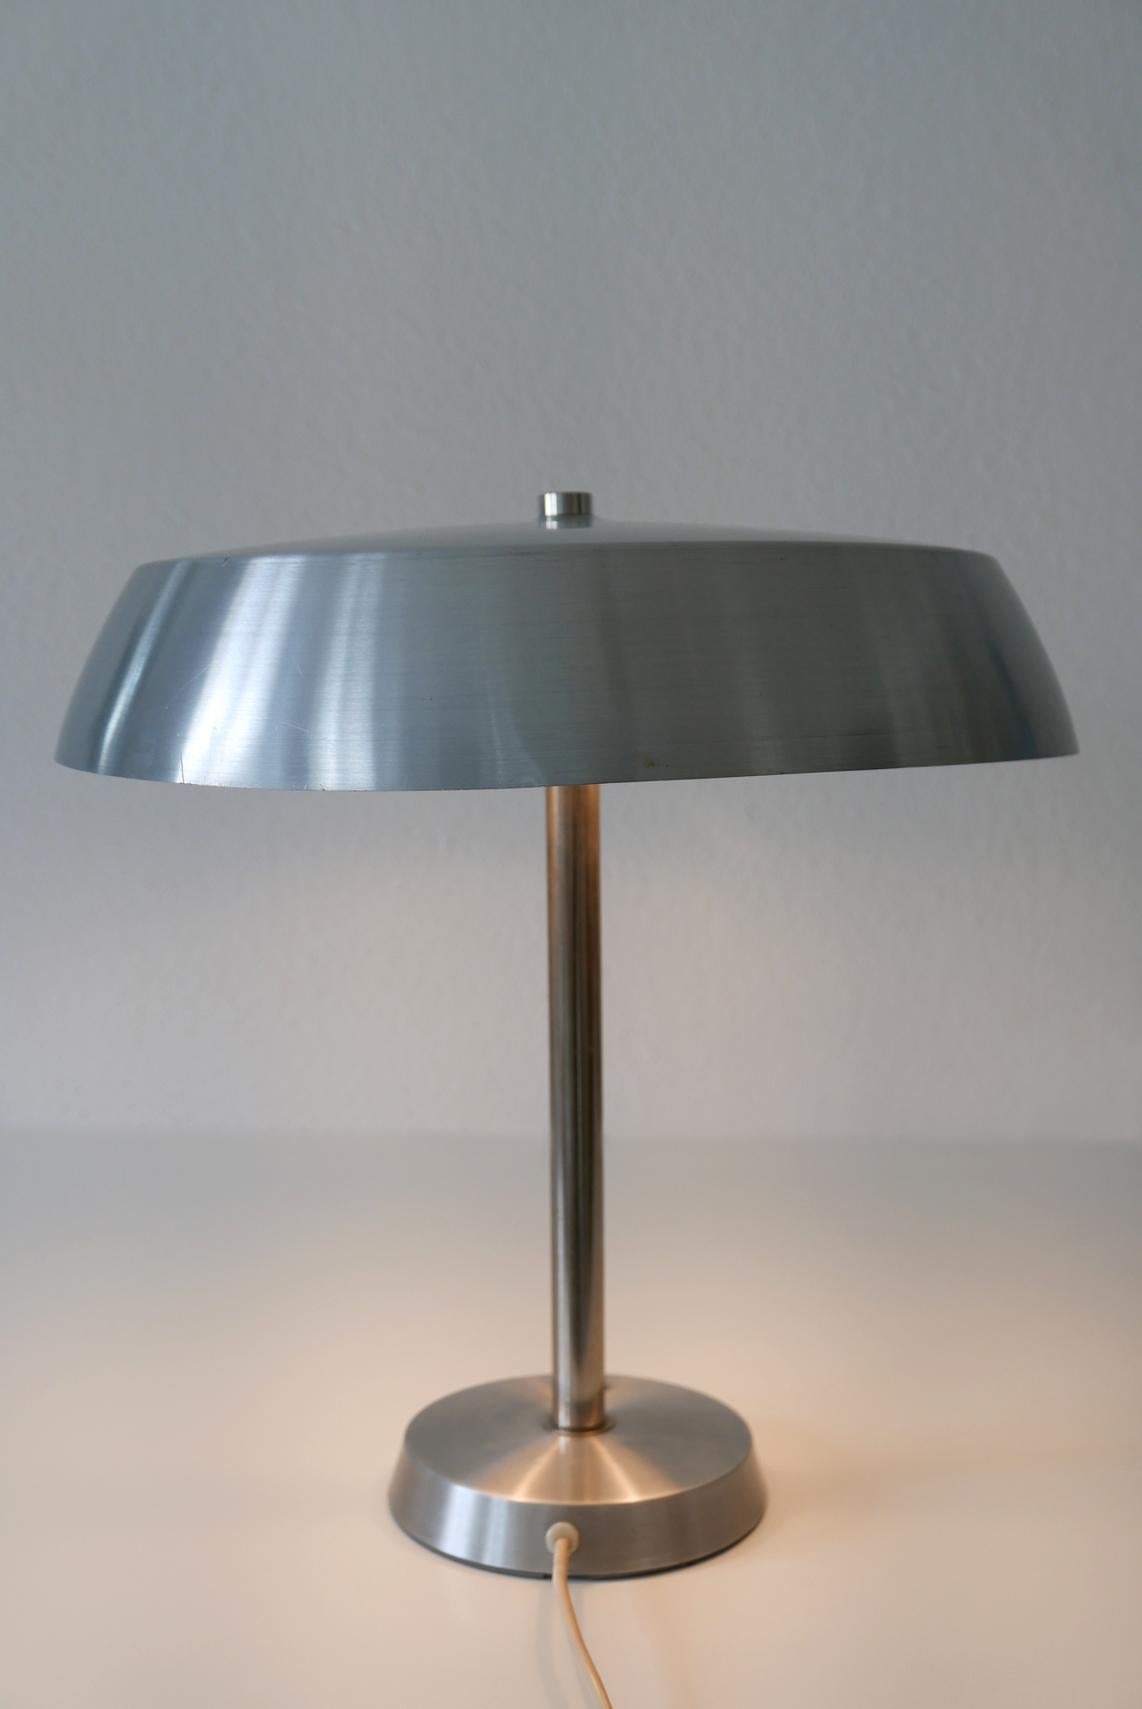 Elegant Mid-Century Modern table lamp by SIS, 1960s, Germany.

Executed in polished aluminium sheet and nickel-plated steel tube. The lamp needs 2 x E27 Edison screw fit bulbs, is wired, and in working condition. It runs both on 110 / 230 Volt.

Our